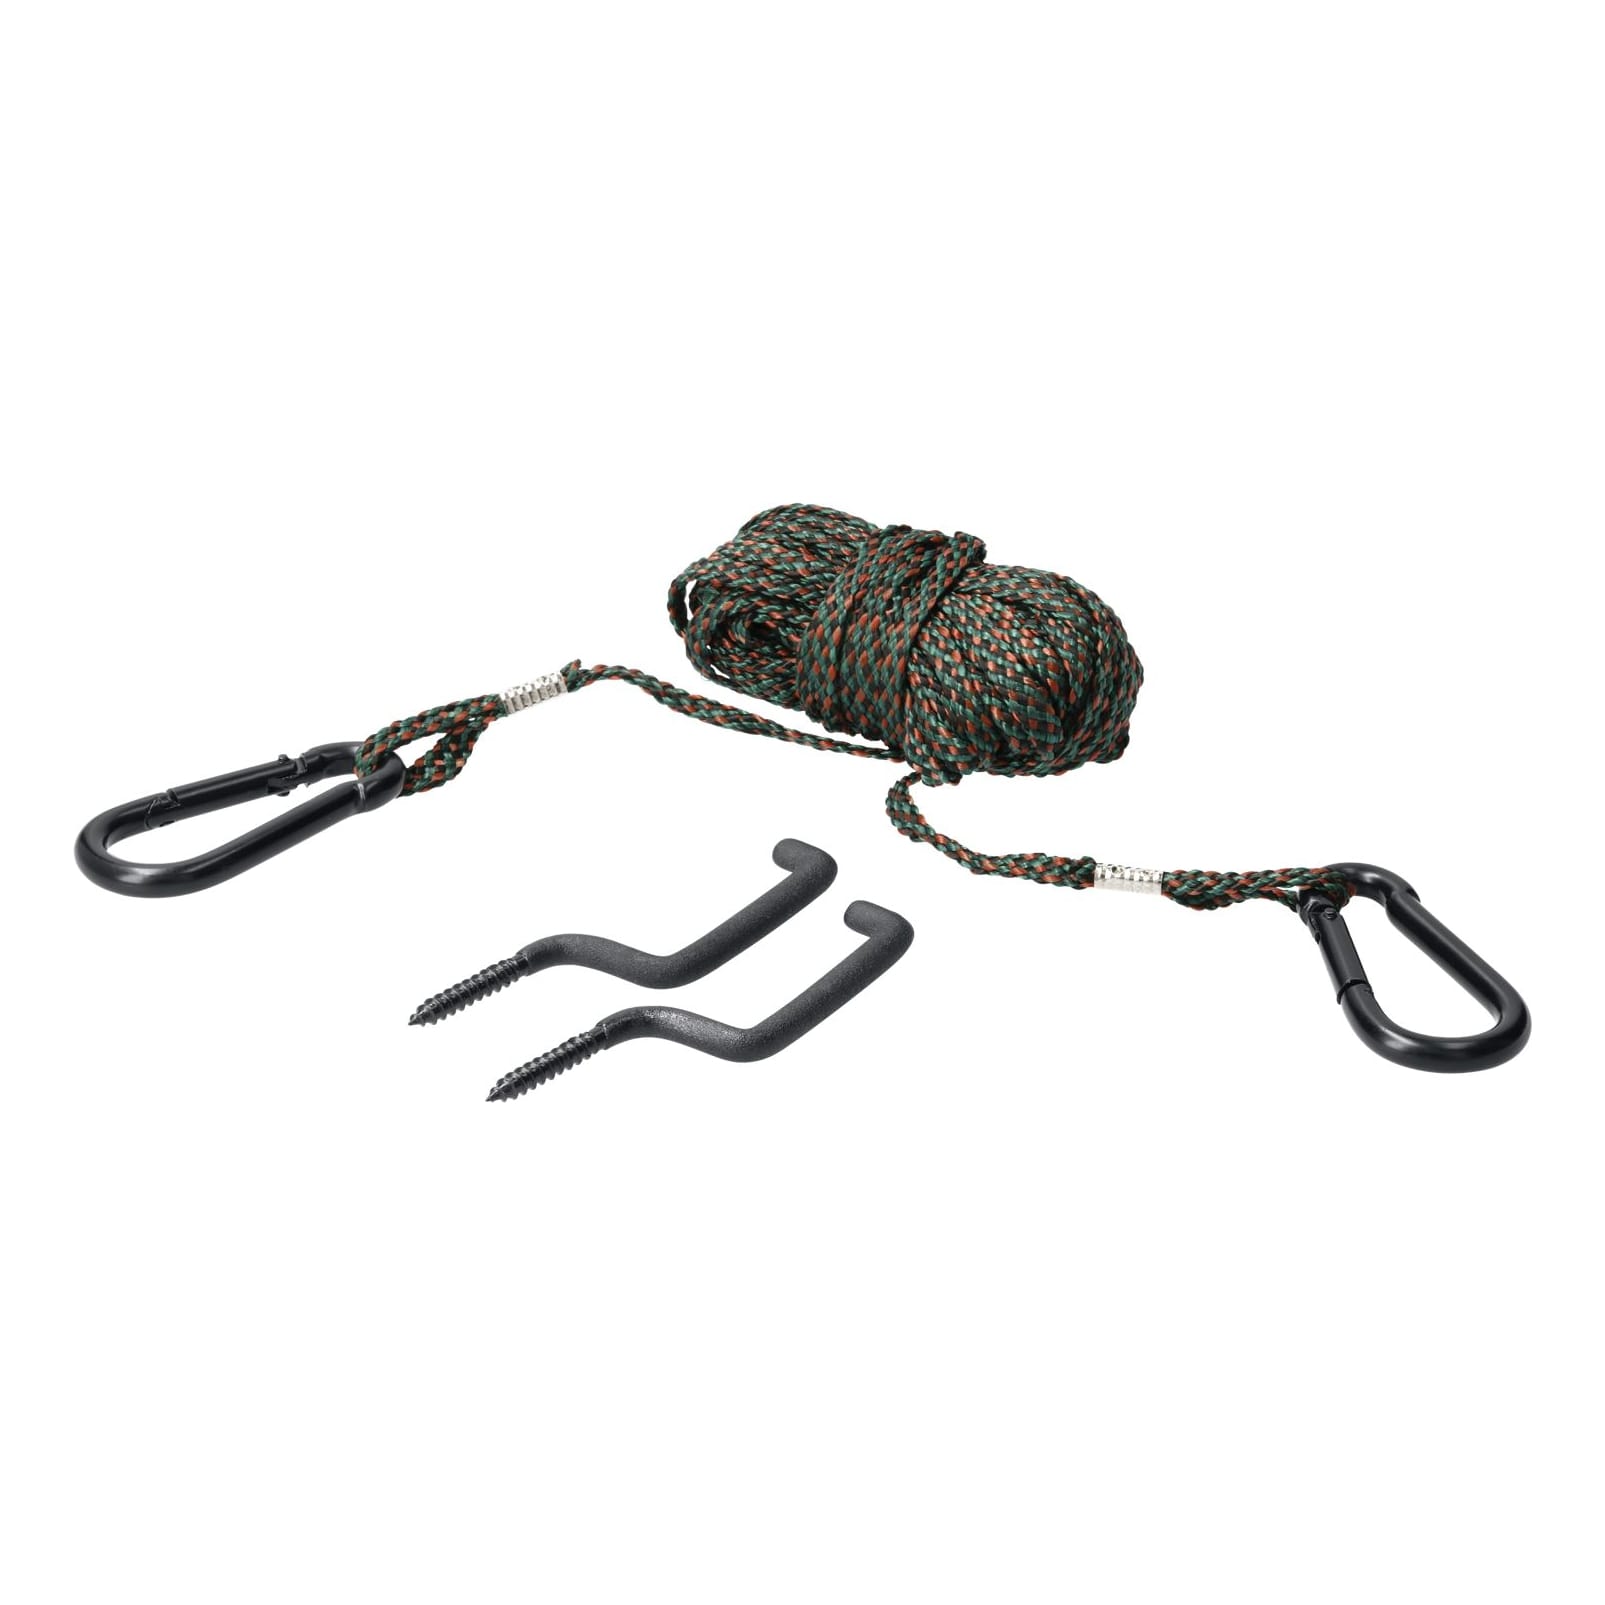 Pursuit® Gear Holder and Hoist Rope Combo